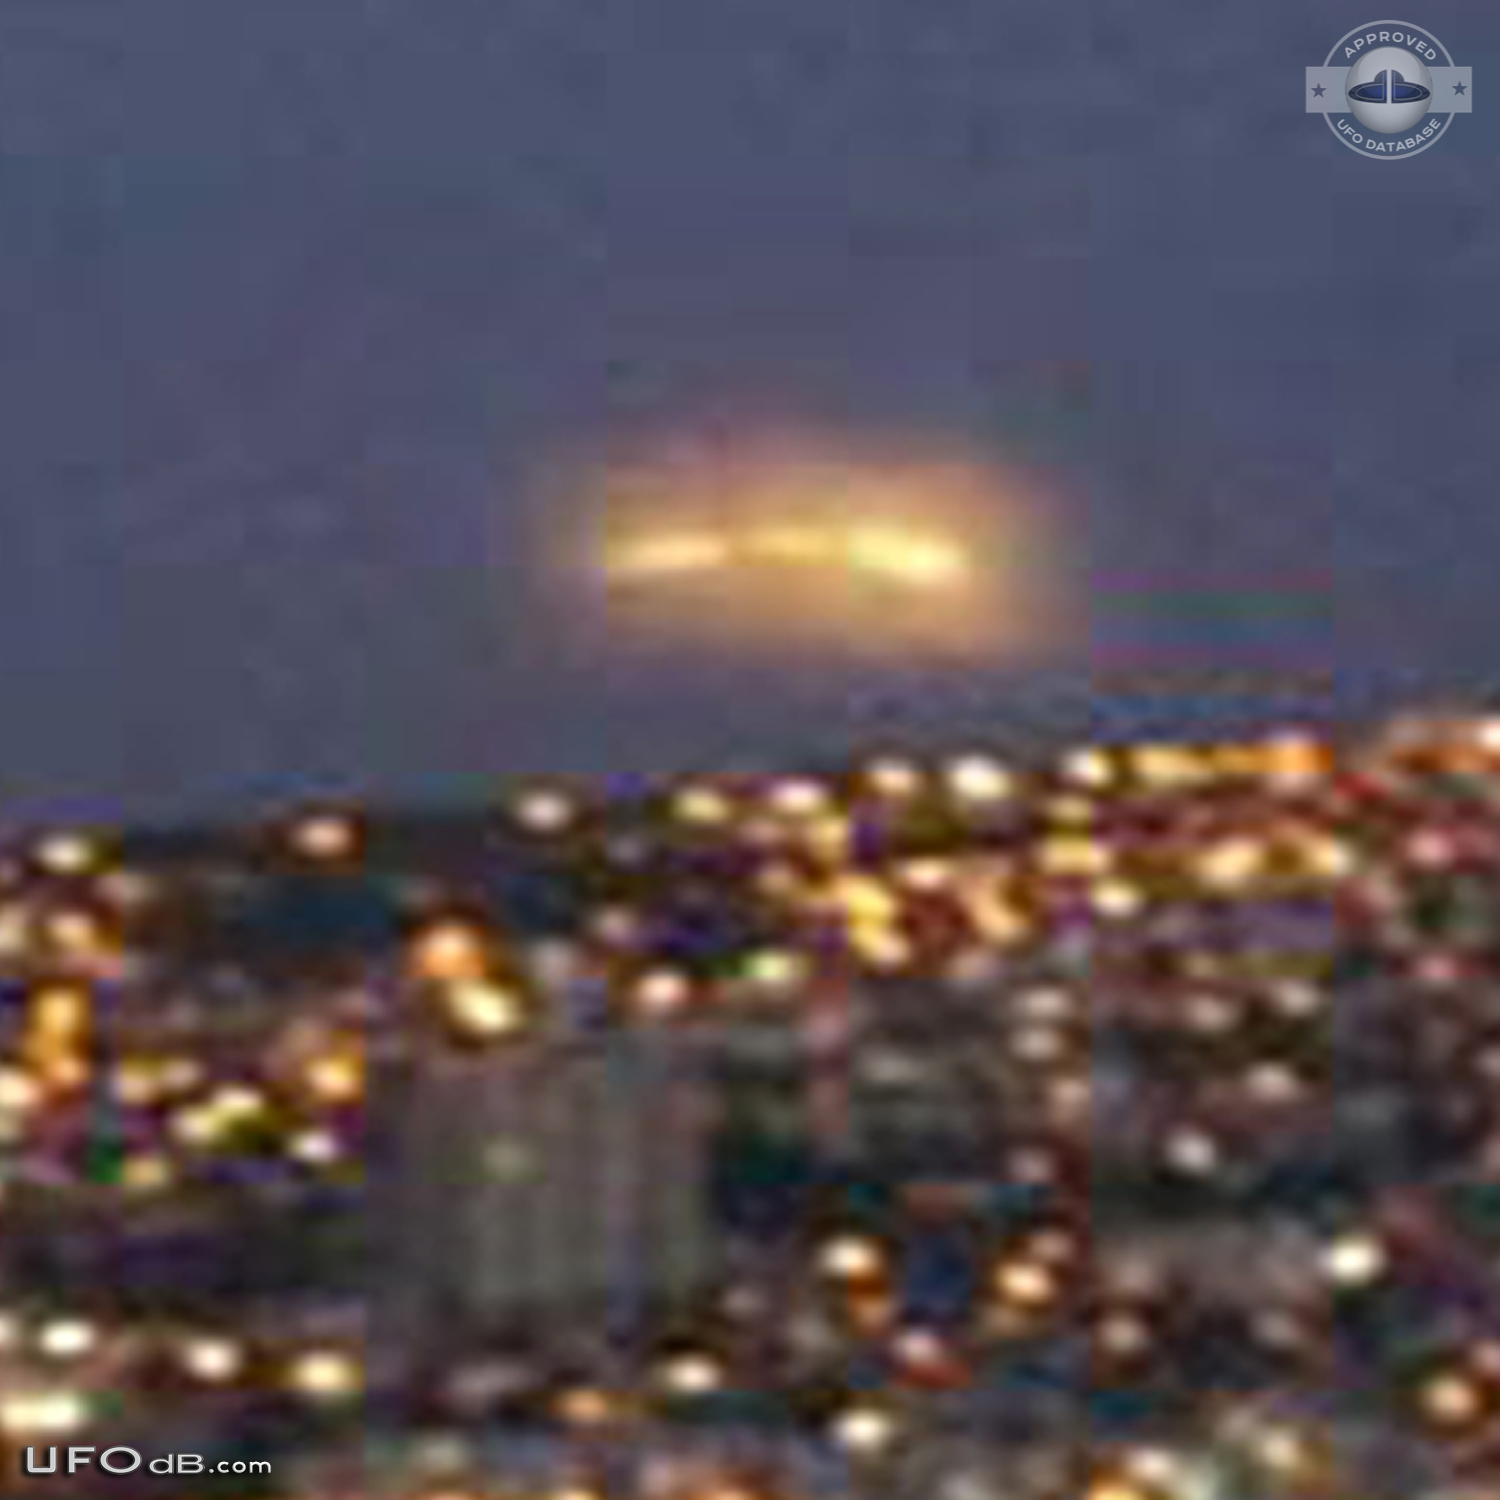 UFO saucer caught on picture by journalist in Mexico - October 2014 UFO Picture #639-5